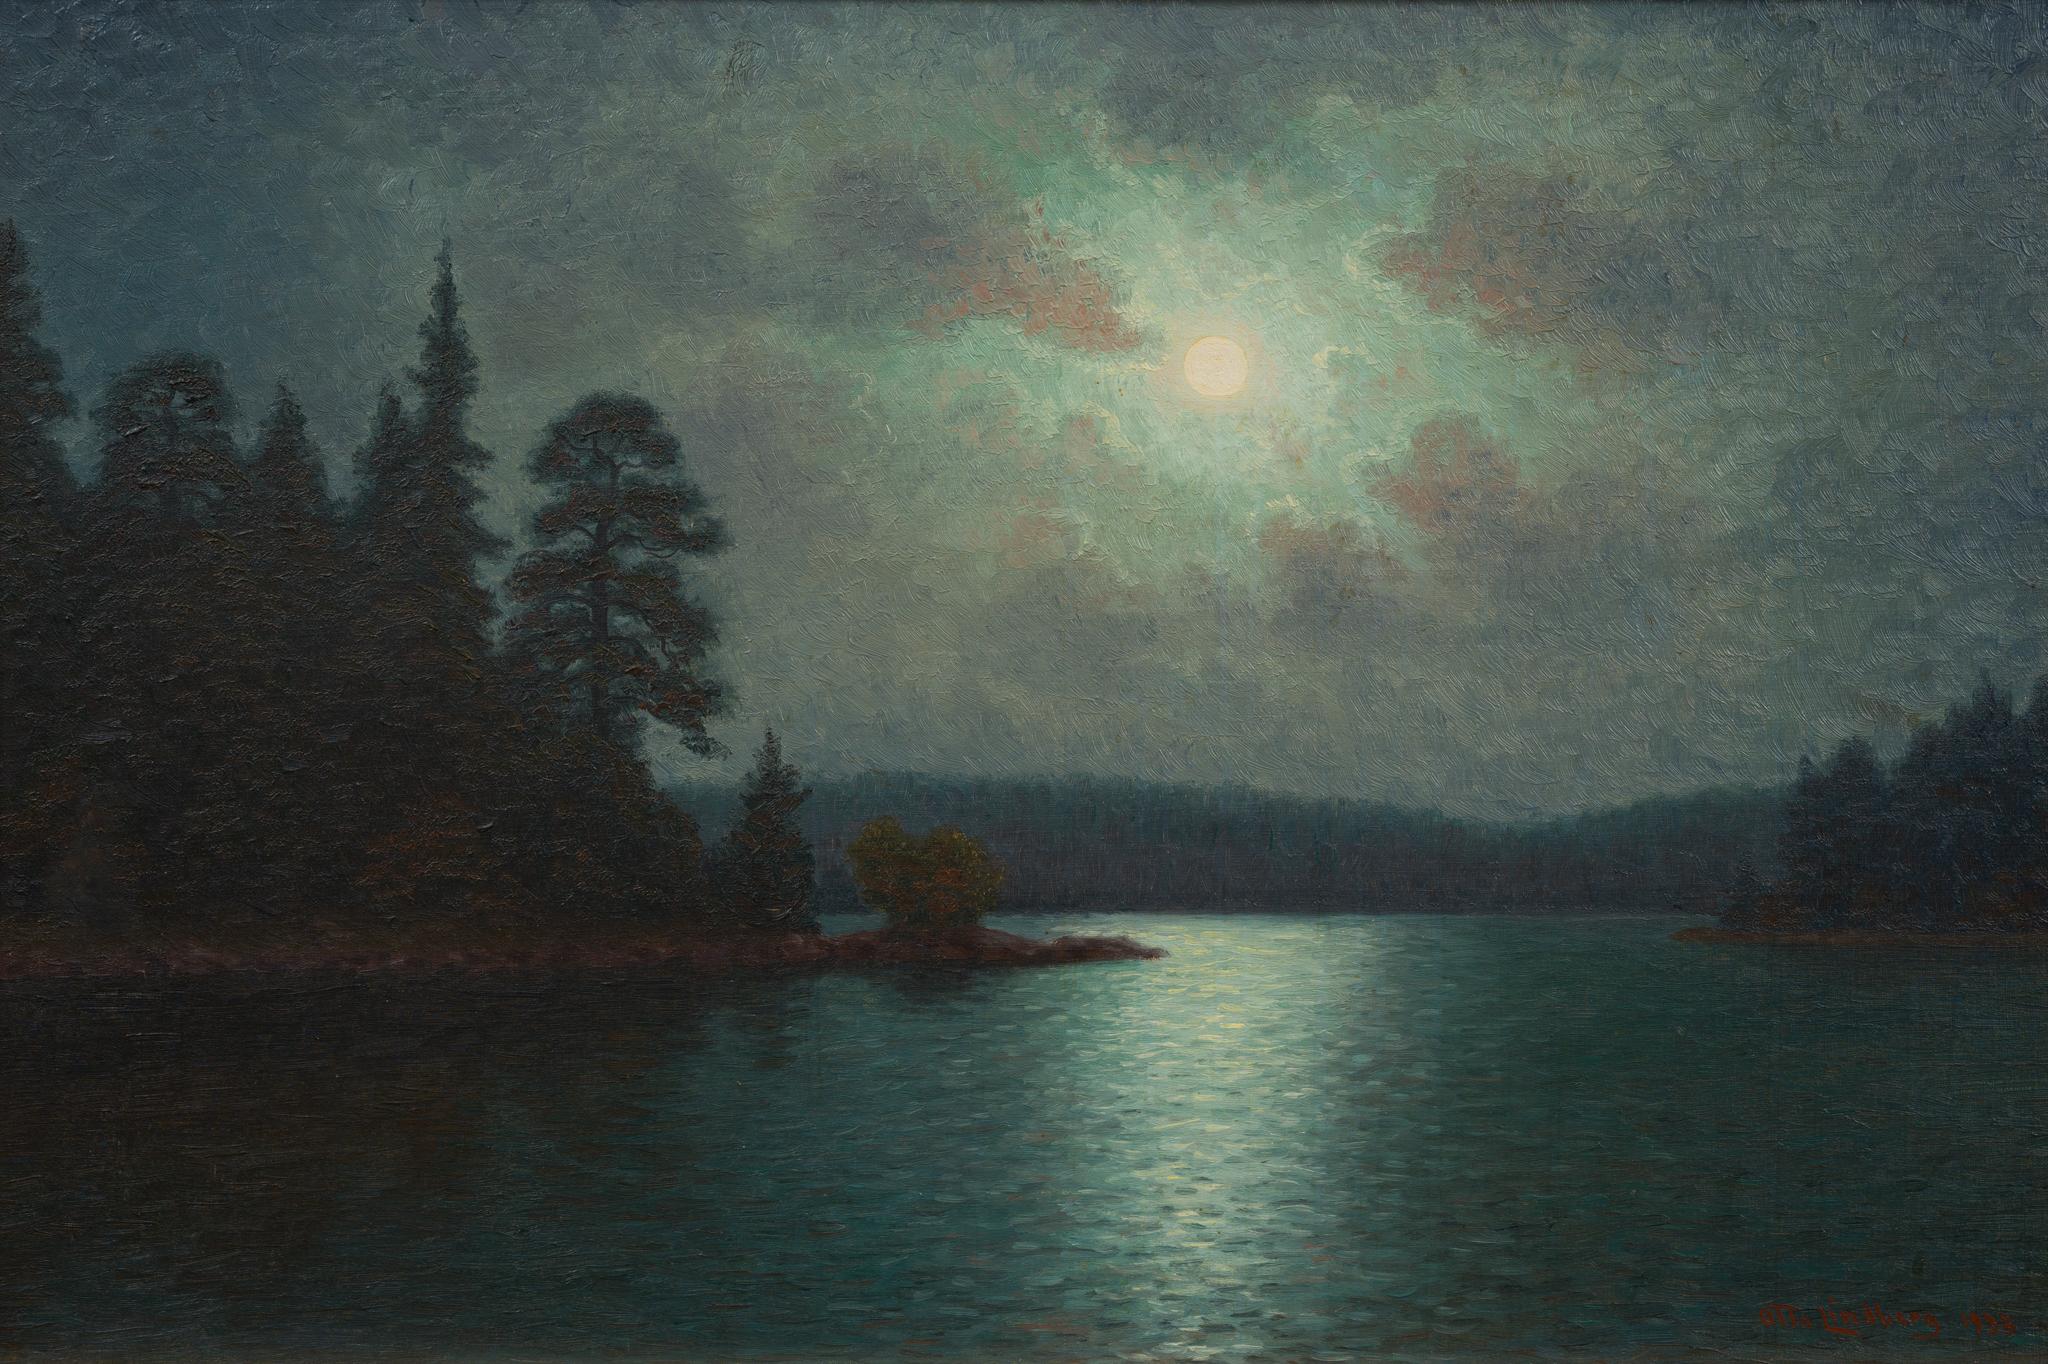 Otto Lindberg's 'Moonlight Over the Lake' is a remarkable testament to the serene beauty and atmospheric tranquility that characterizes the finest of landscape paintings. Created in 1933, this piece encapsulates a moment of quietude under the gentle